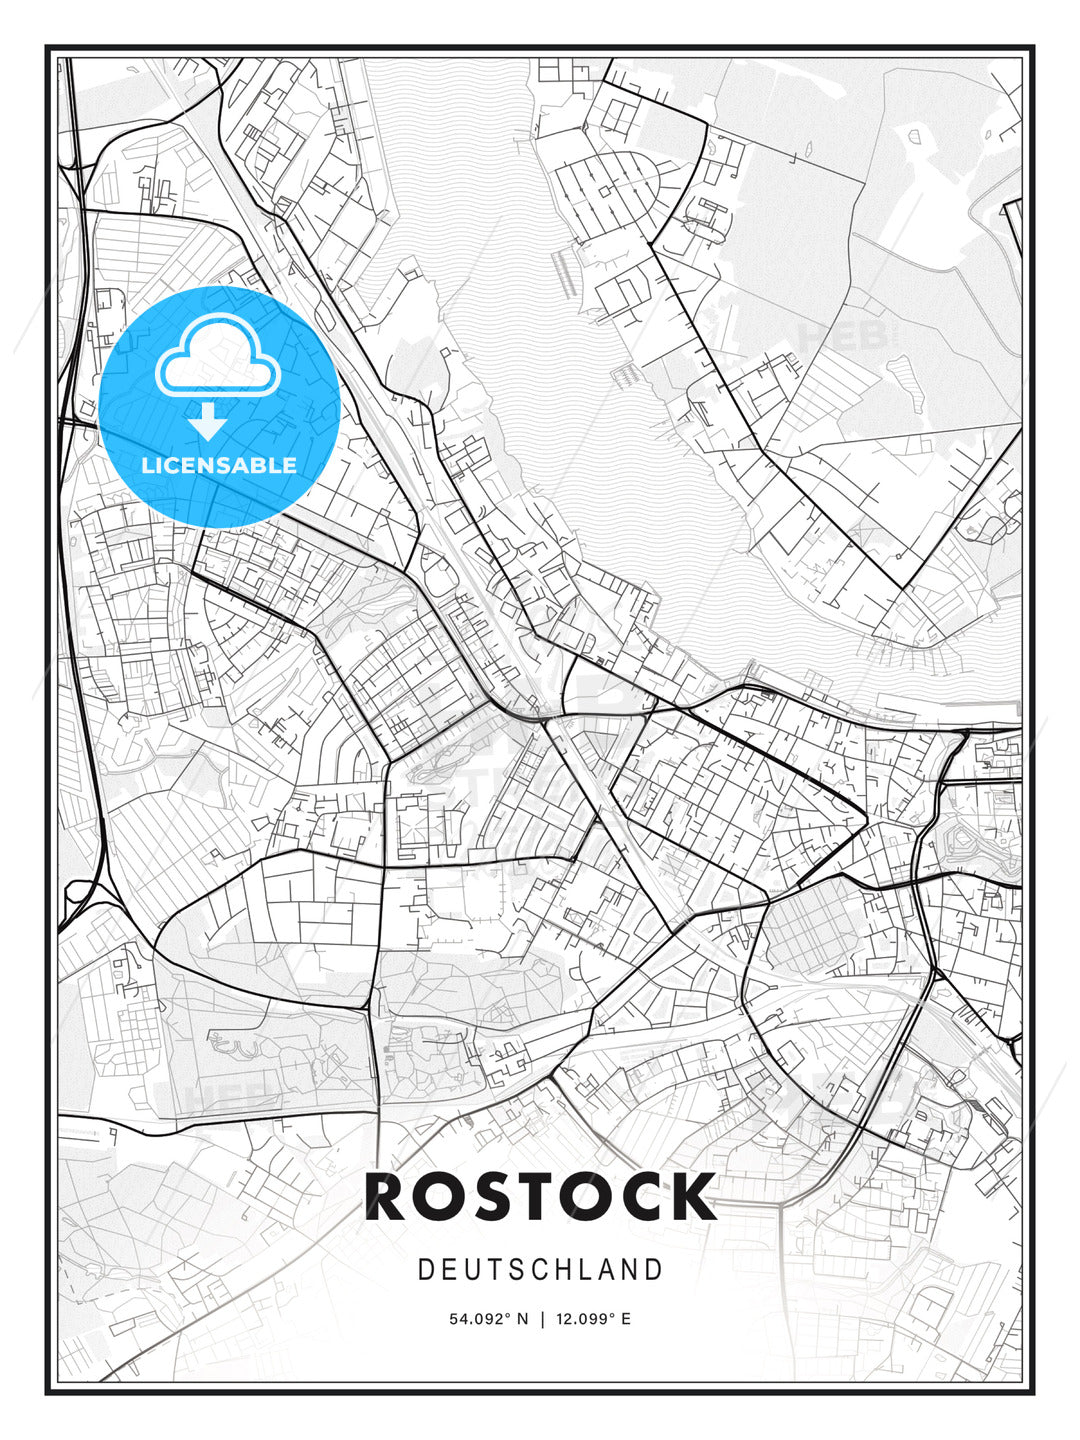 Rostock, Germany, Modern Print Template in Various Formats - HEBSTREITS Sketches